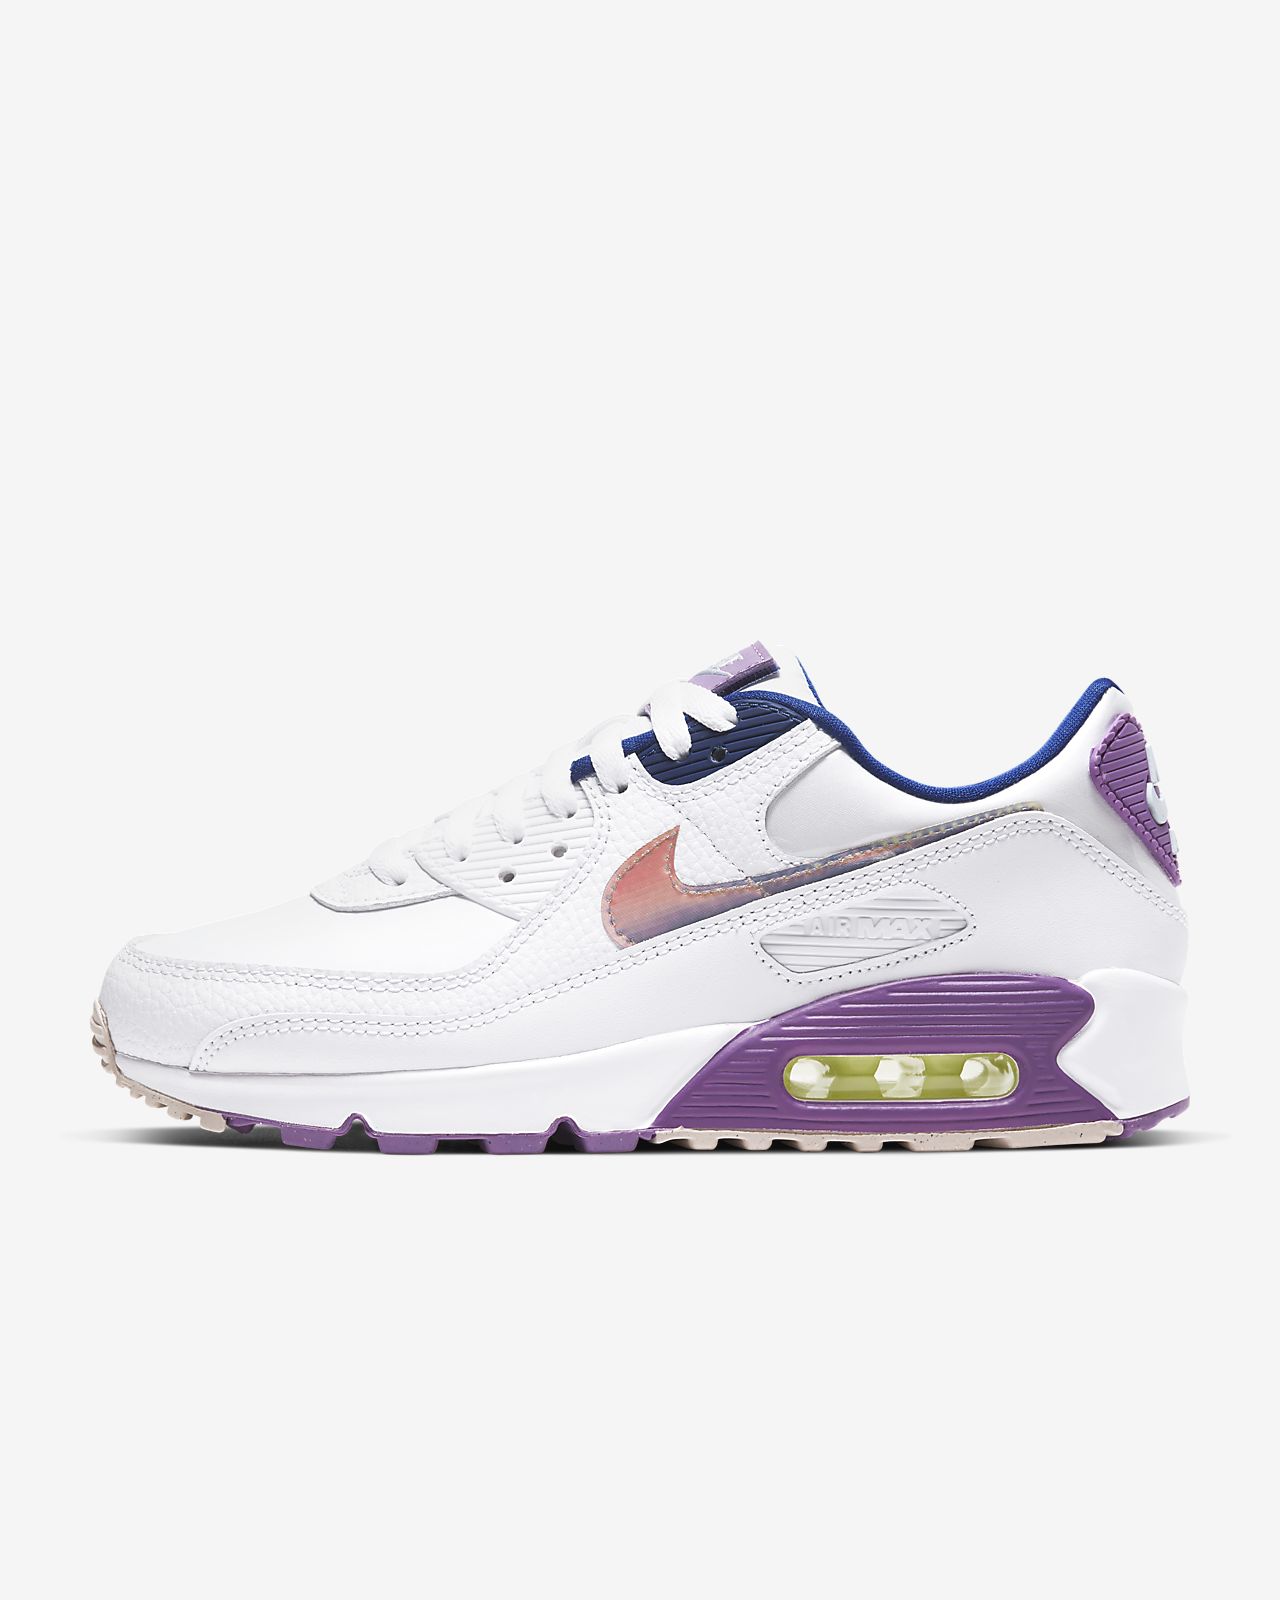 vazo Energise kama outlet store nike air max 90 wit dames grootte ...